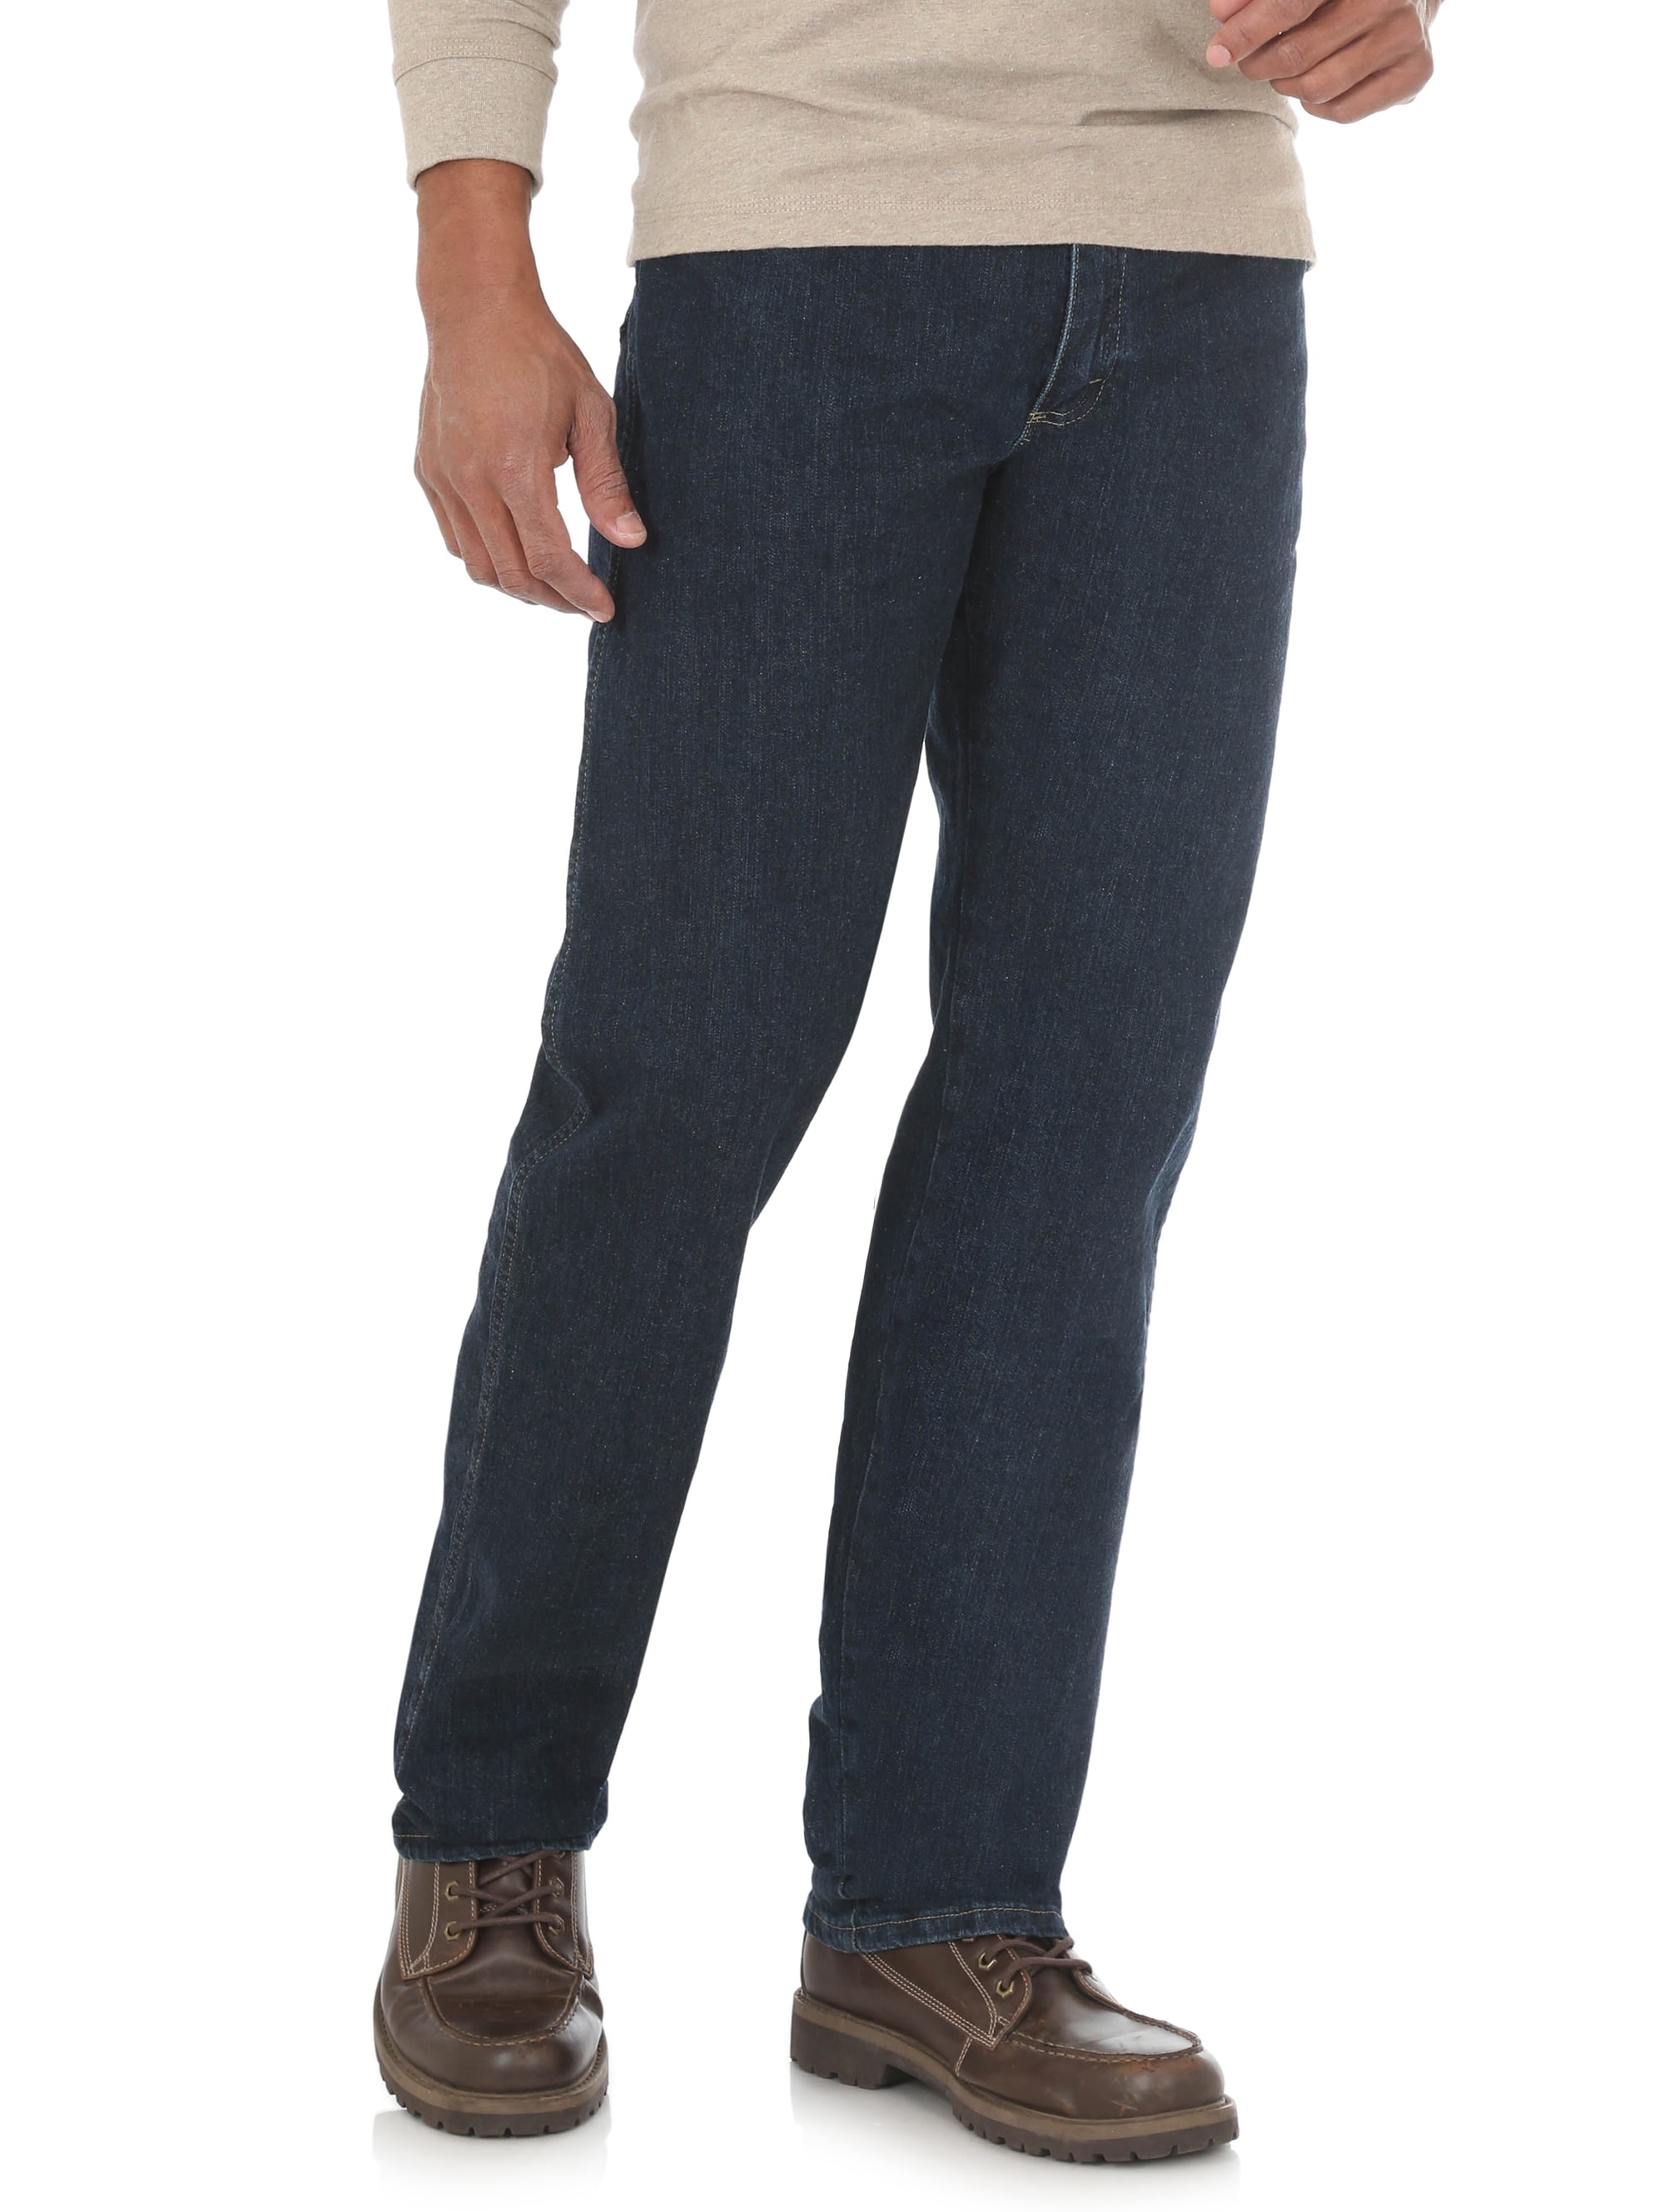 Men's Heavyweight Selvedge Tapered Jeans in Indigo - Thursday Boot Company